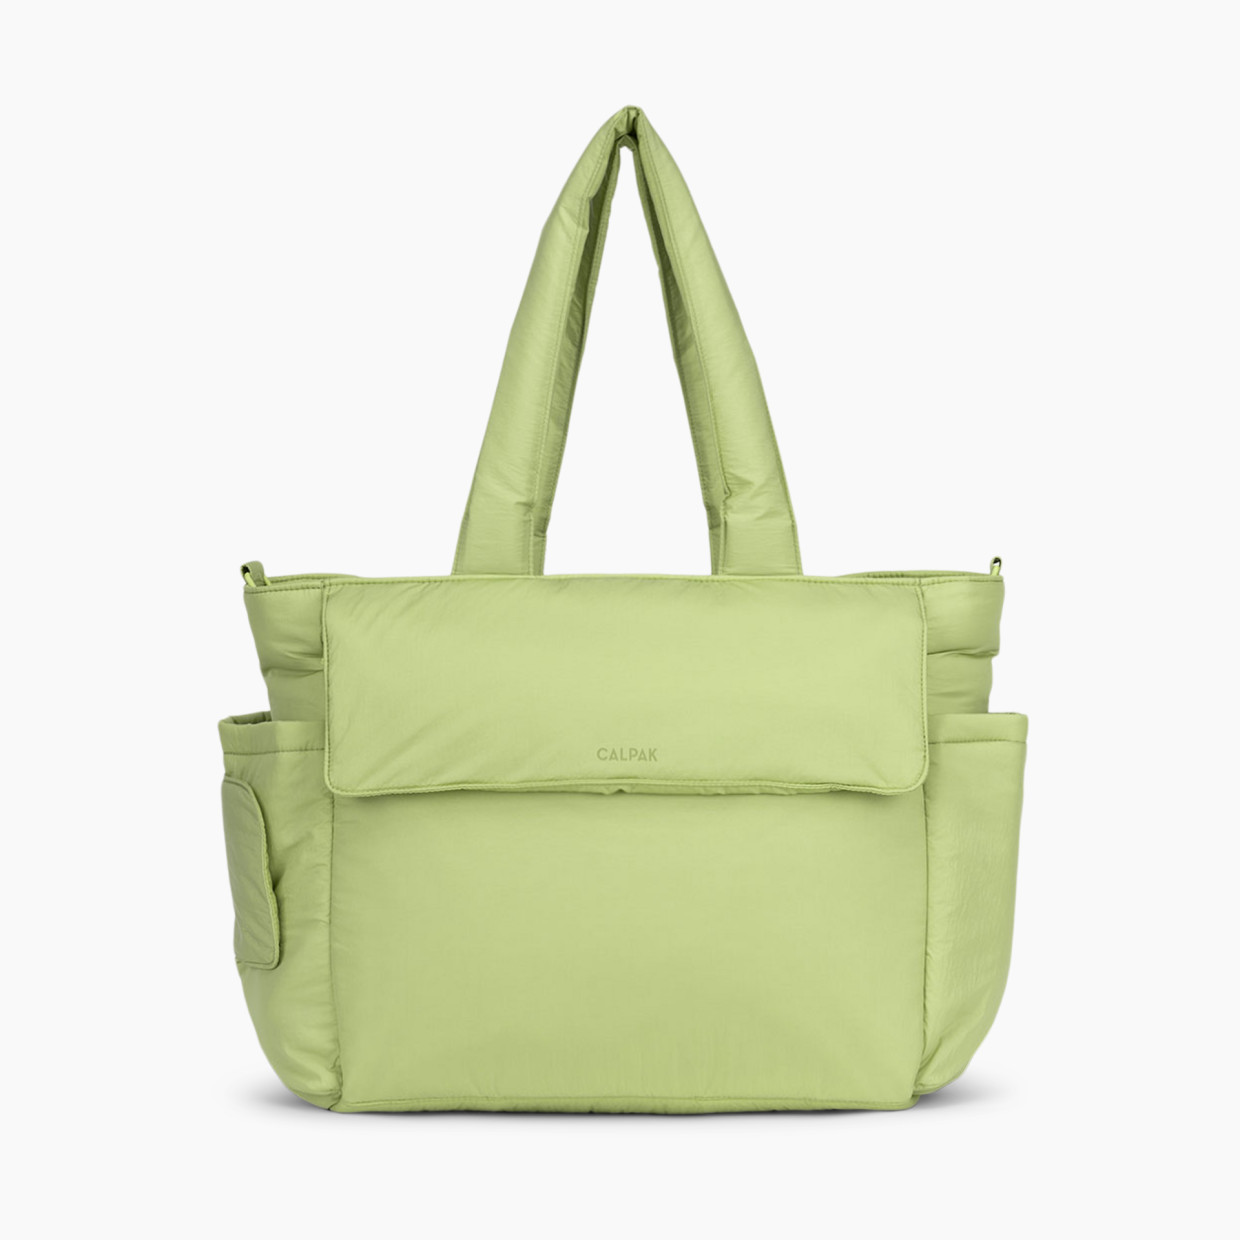 CALPAK Diaper Tote Bag With Laptop Sleeve - Lime.